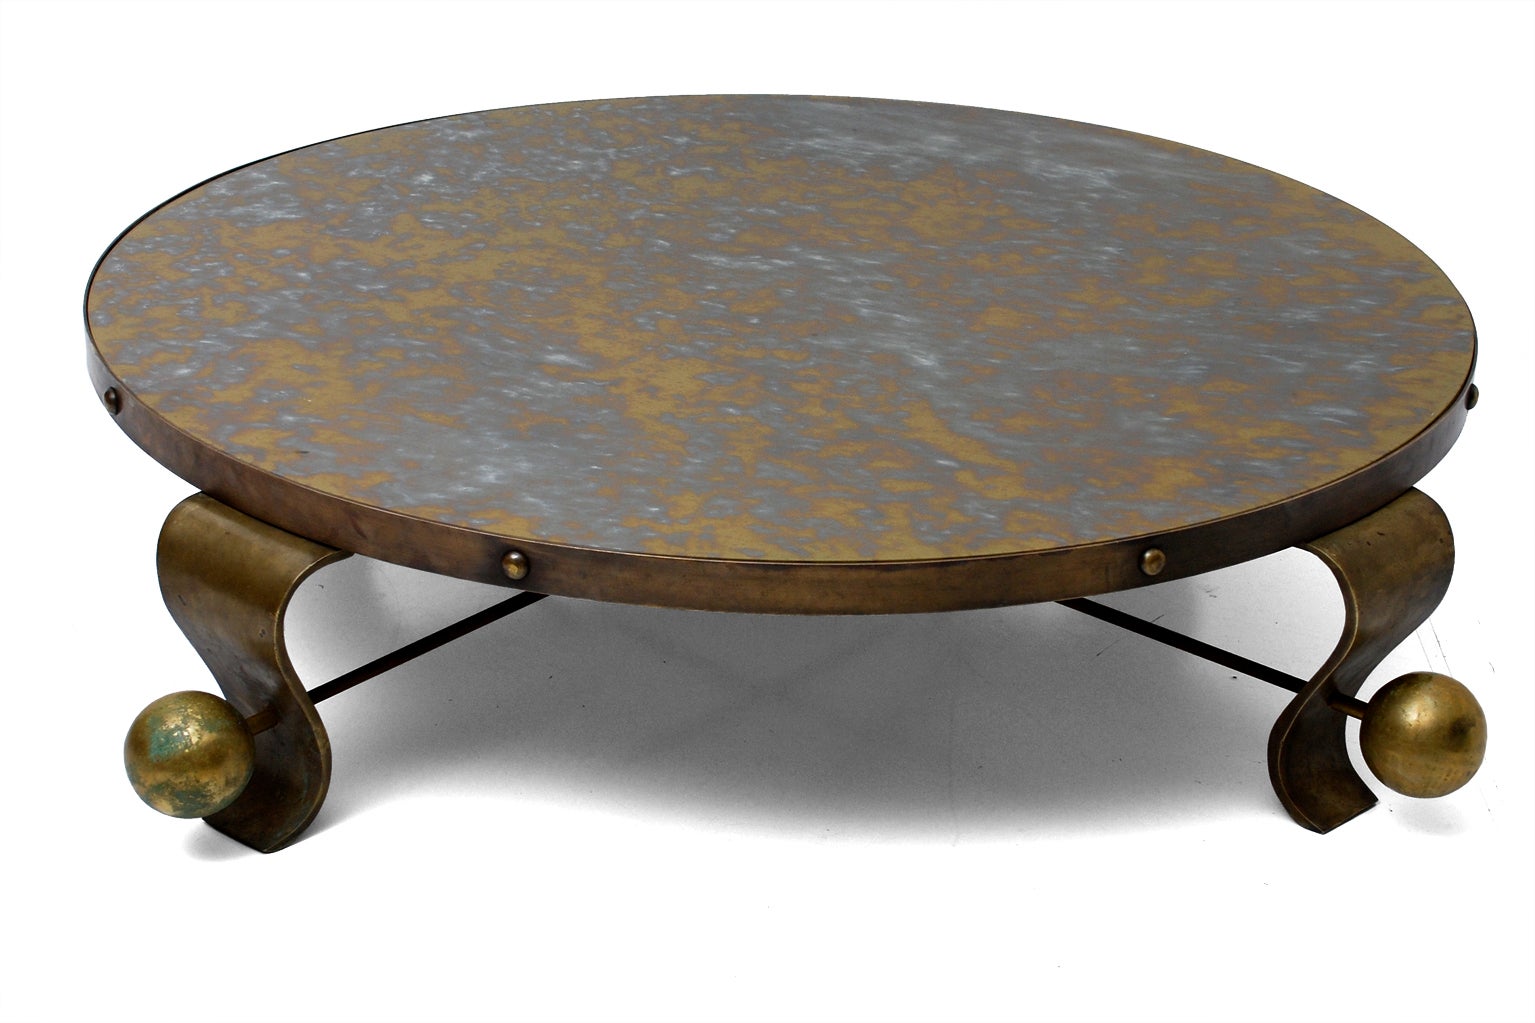 Arturo Pani Cocktail Table with Four Legs